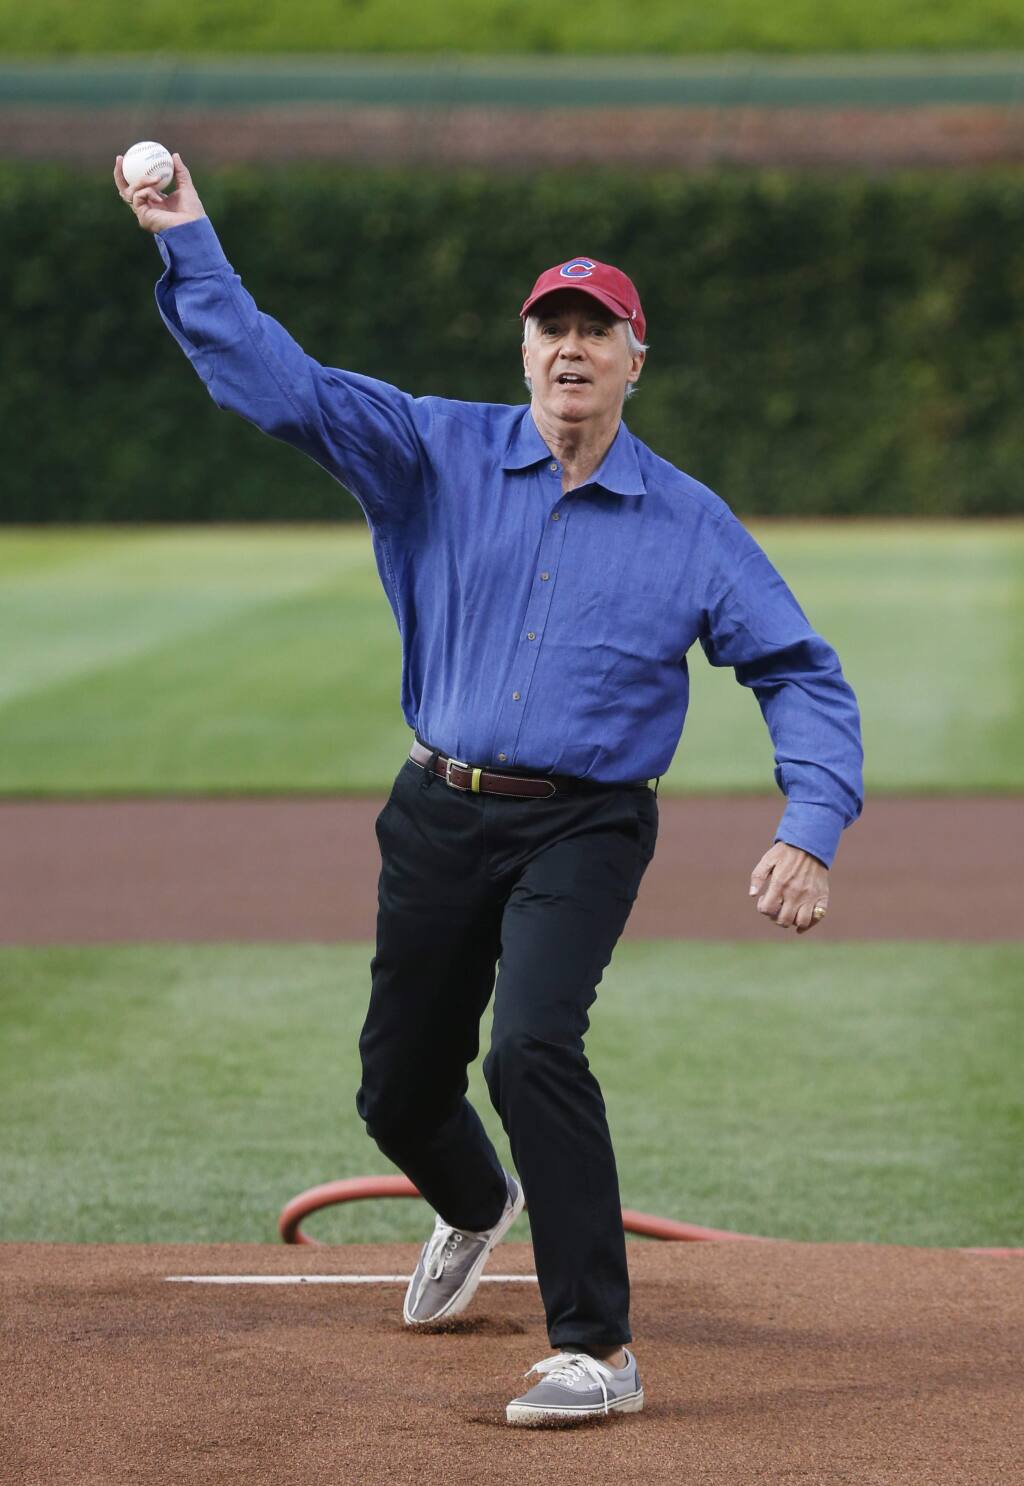 NPR reporter Scott Simon throws out a ceremonial first pitch before a baseball game between the Chicago Cubs and the Colorado Rockies Monday, July 28, 2014, in Chicago. (AP Photo/Charles Rex Arbogast)